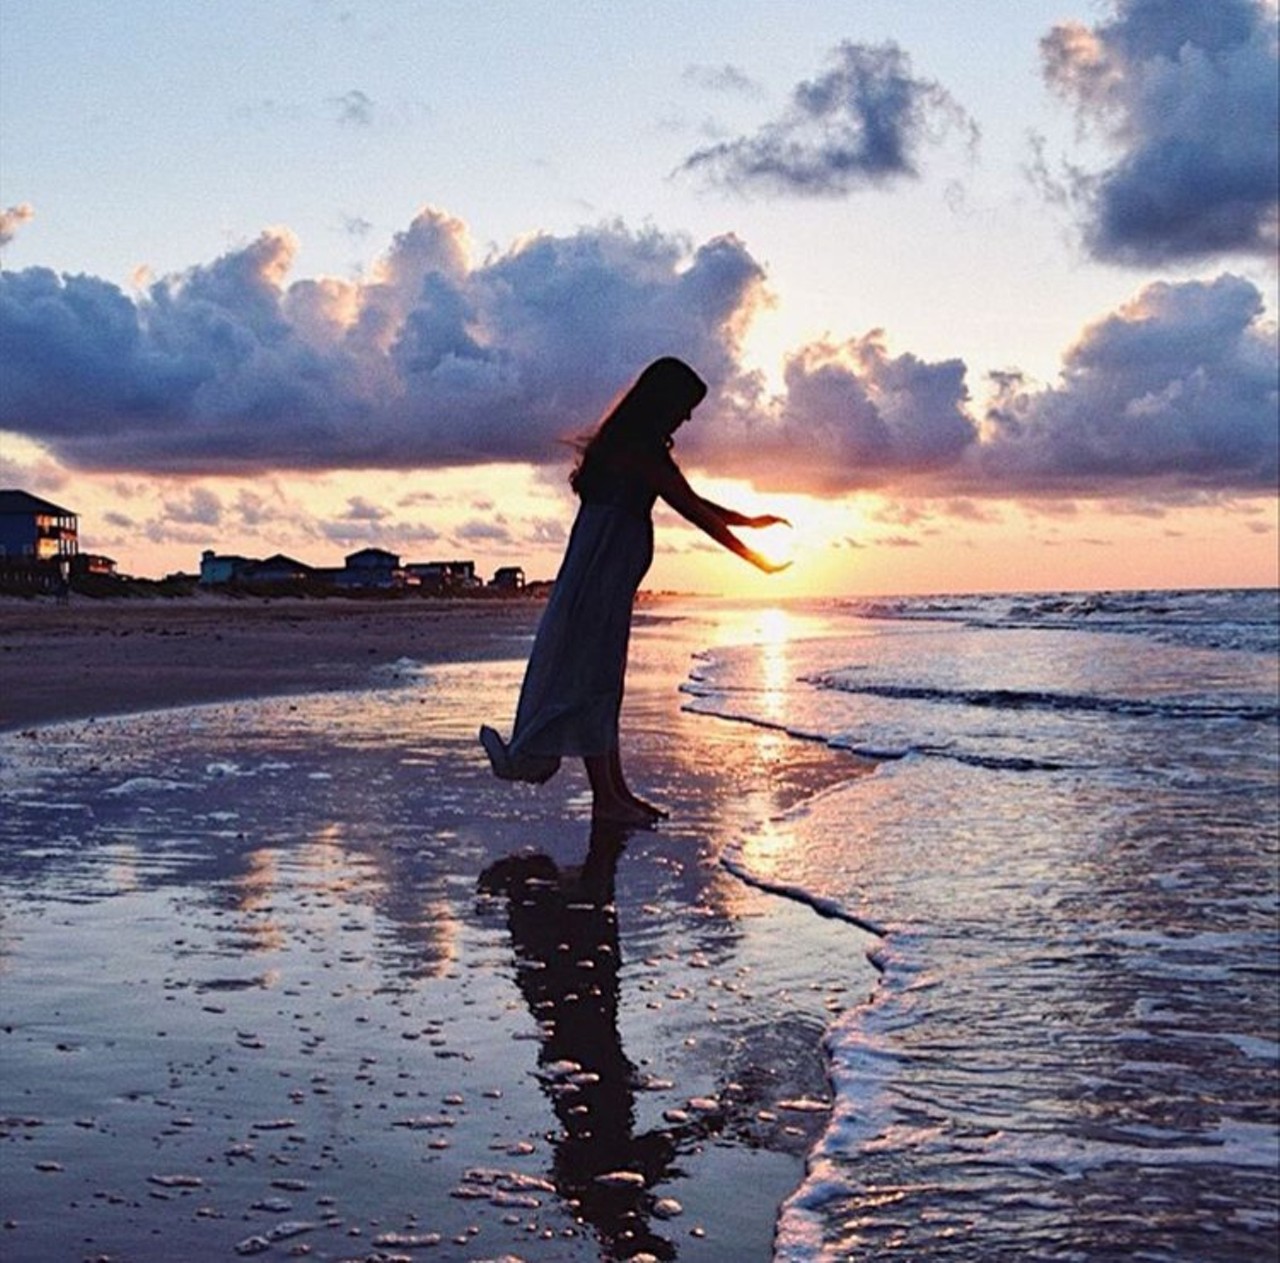 Crystal Beach
Bolivar Peninsula, crystalbeach.com
Crystal Beach is a Southeast Texas getaway known for its campsites and fishing opportunities. Daytrippers can often be found playing volleyball on its sandy shores while fisherman cast their reels in the surf or take advantage of Rollover Fish Pass.
Photo via Instagram / amandakwaltman